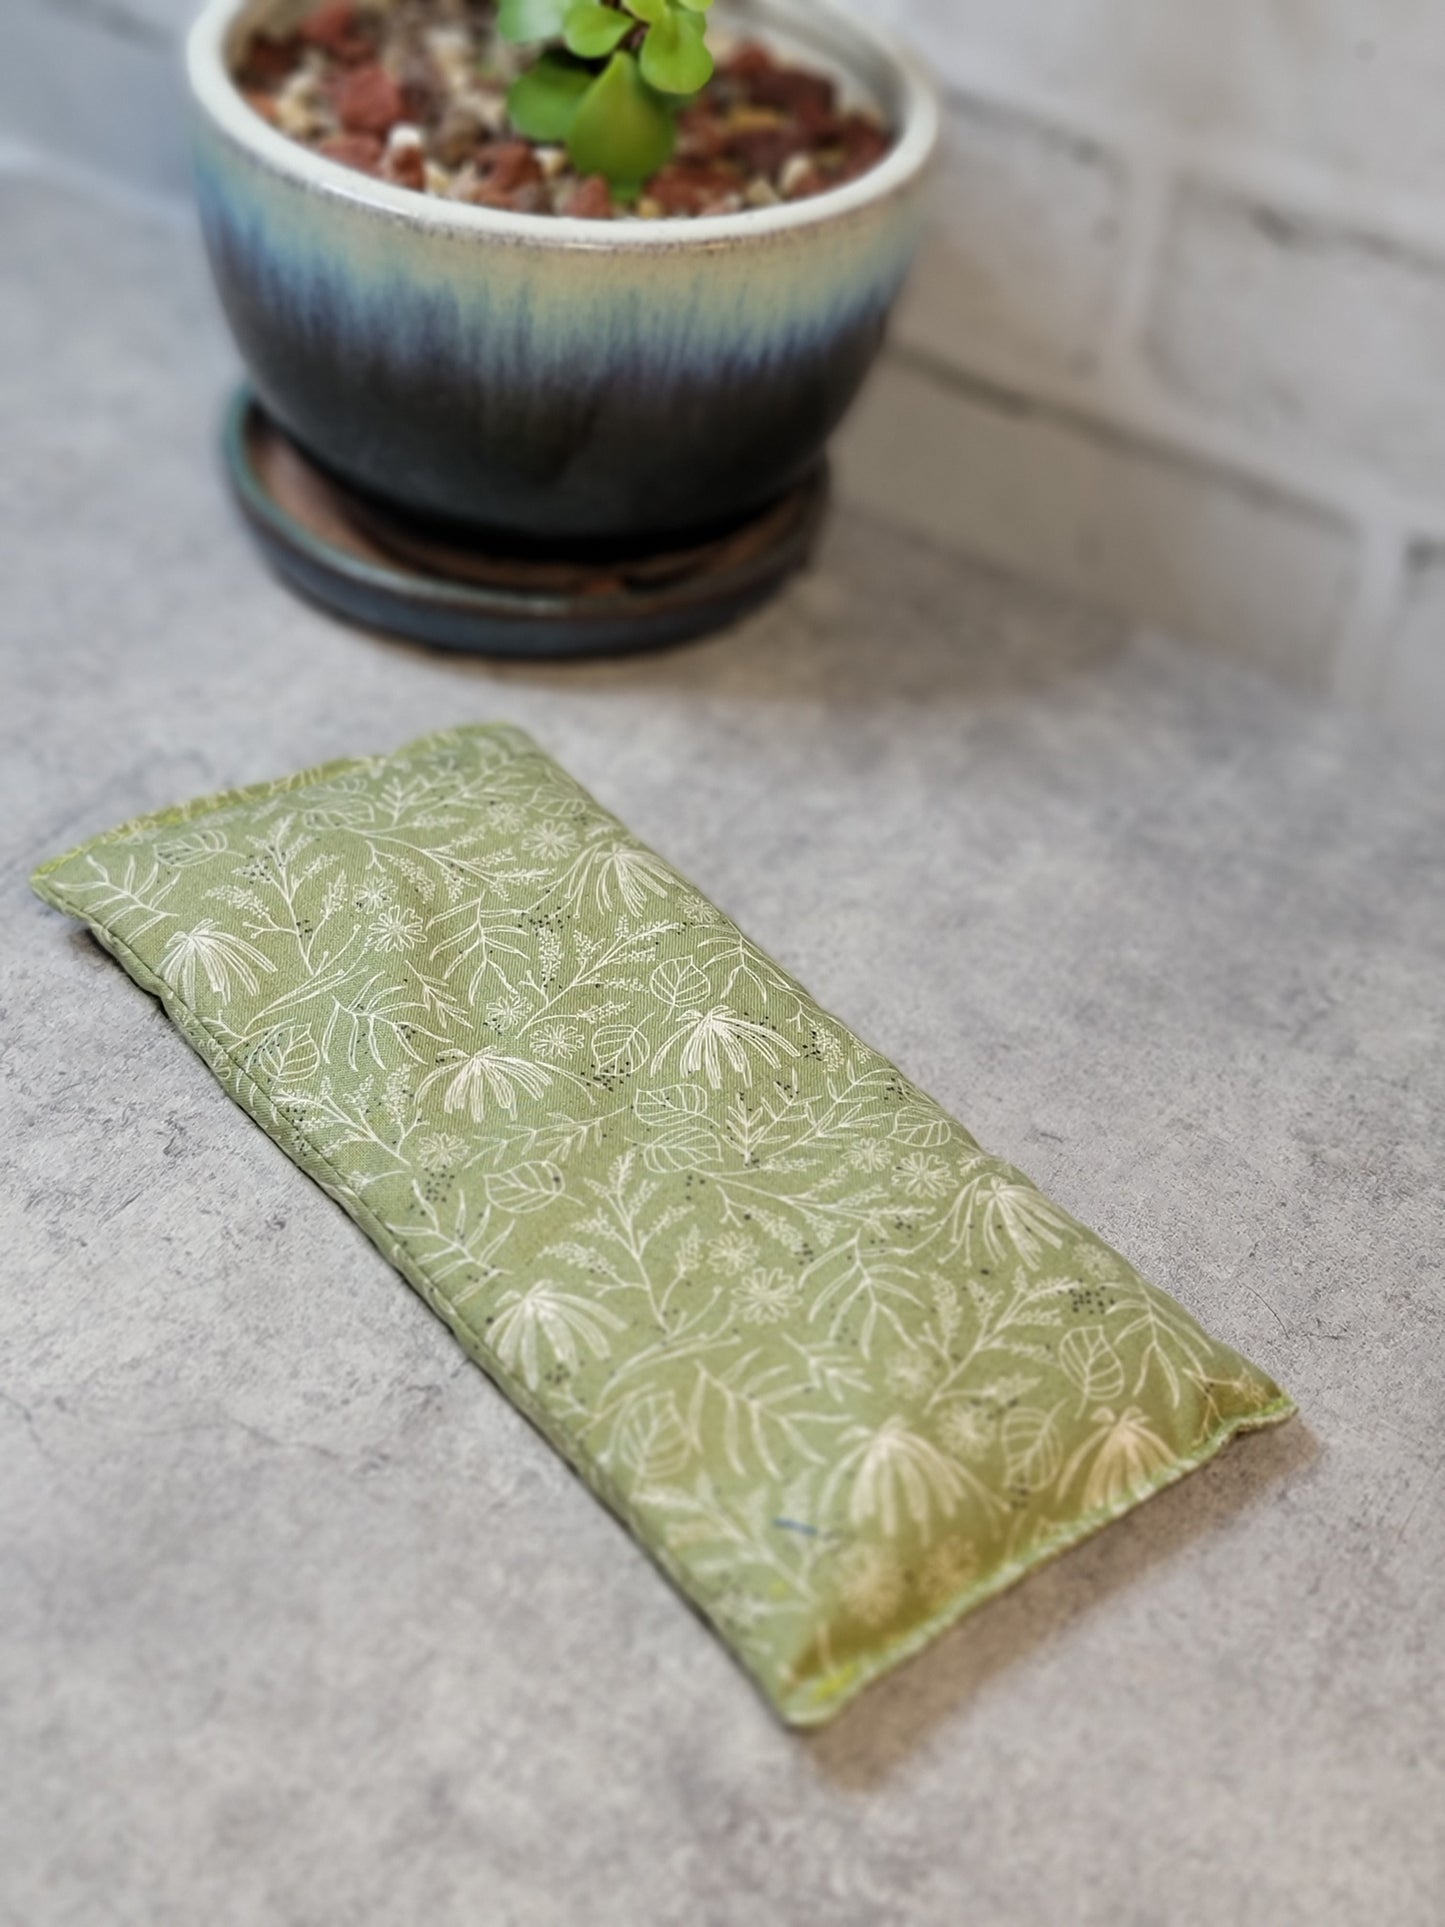 Aromatherapy Hot/Cold Weighted Eye Pillow - Floral Patterns